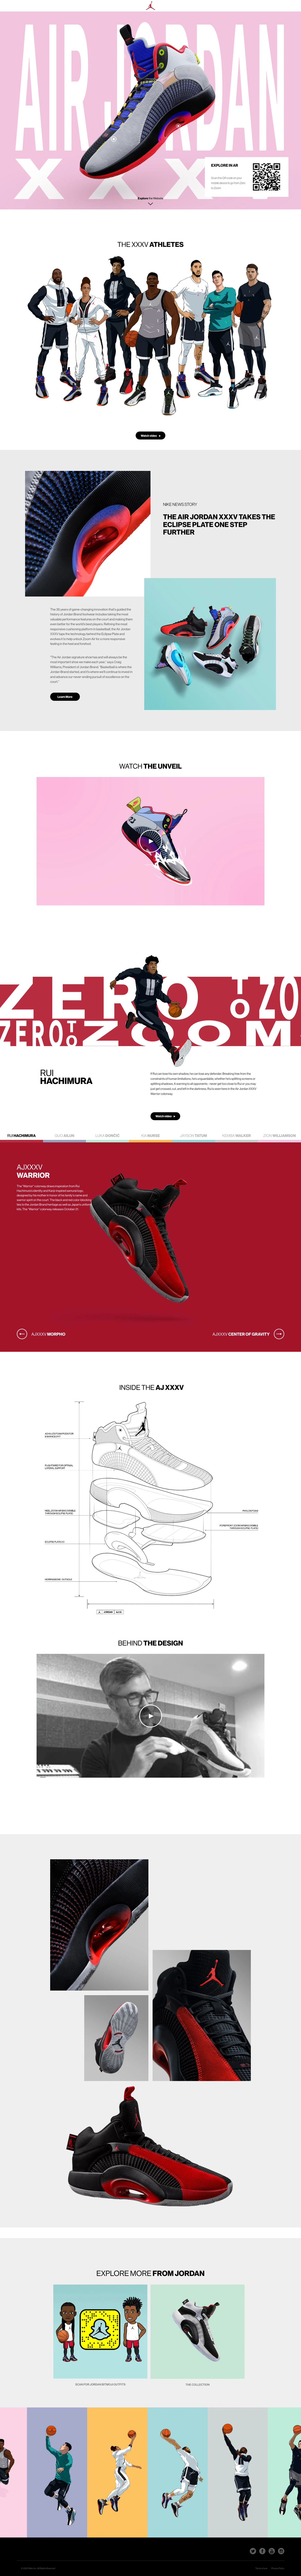 Nike Air Jordan XXXV Unveil Landing Page Example: The Air Jordan XXXV continues the legacy of a cultural icon and is unapologetically the best basketball shoe for the game’s current and future stars.